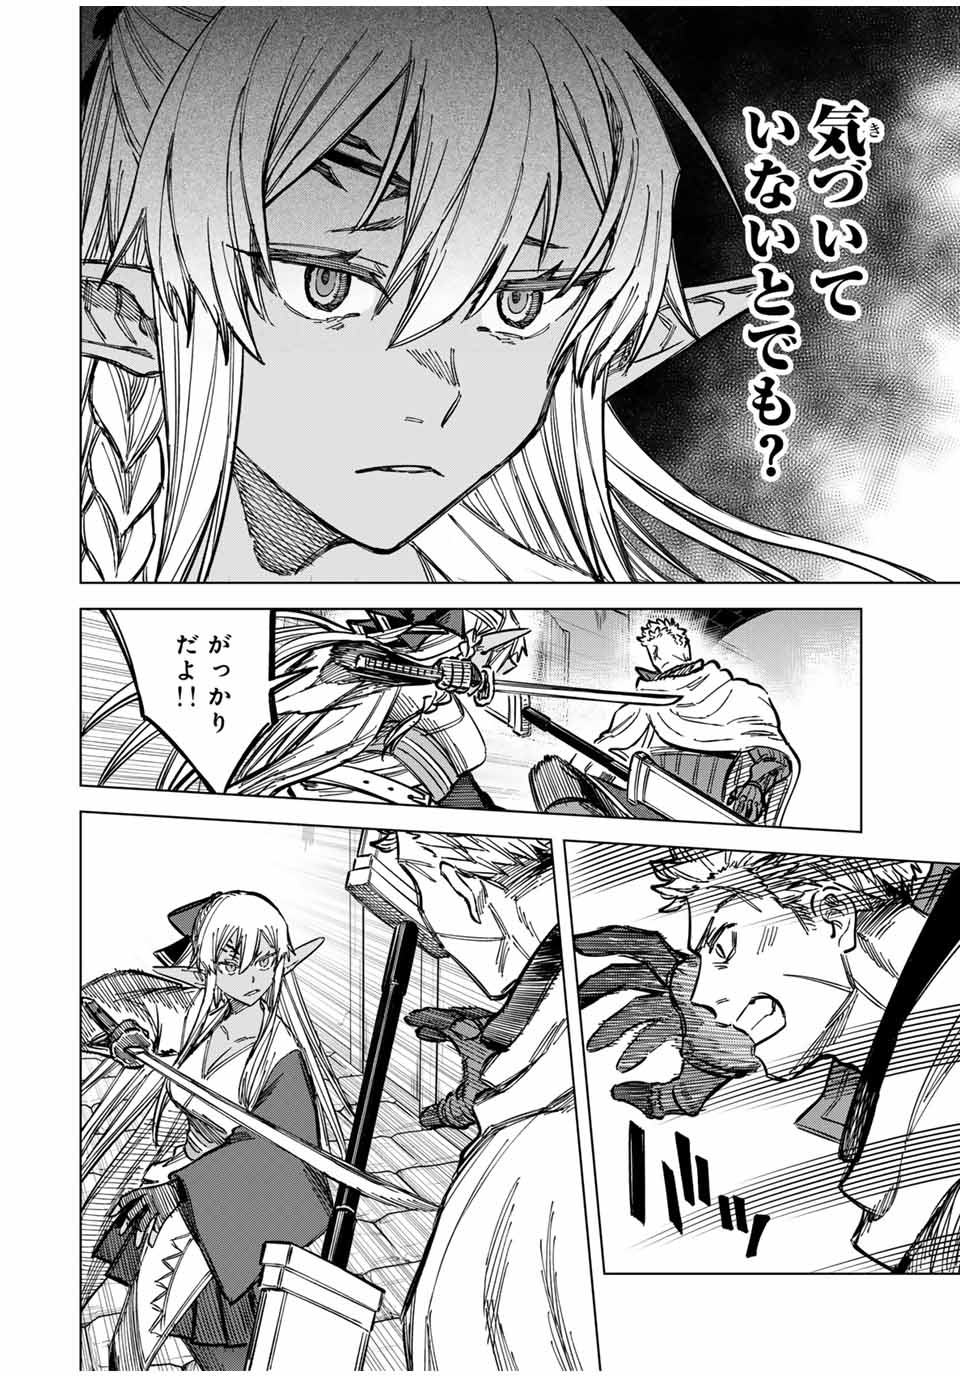 Witch and Mercenary 魔女と傭兵 第13話 - Page 16